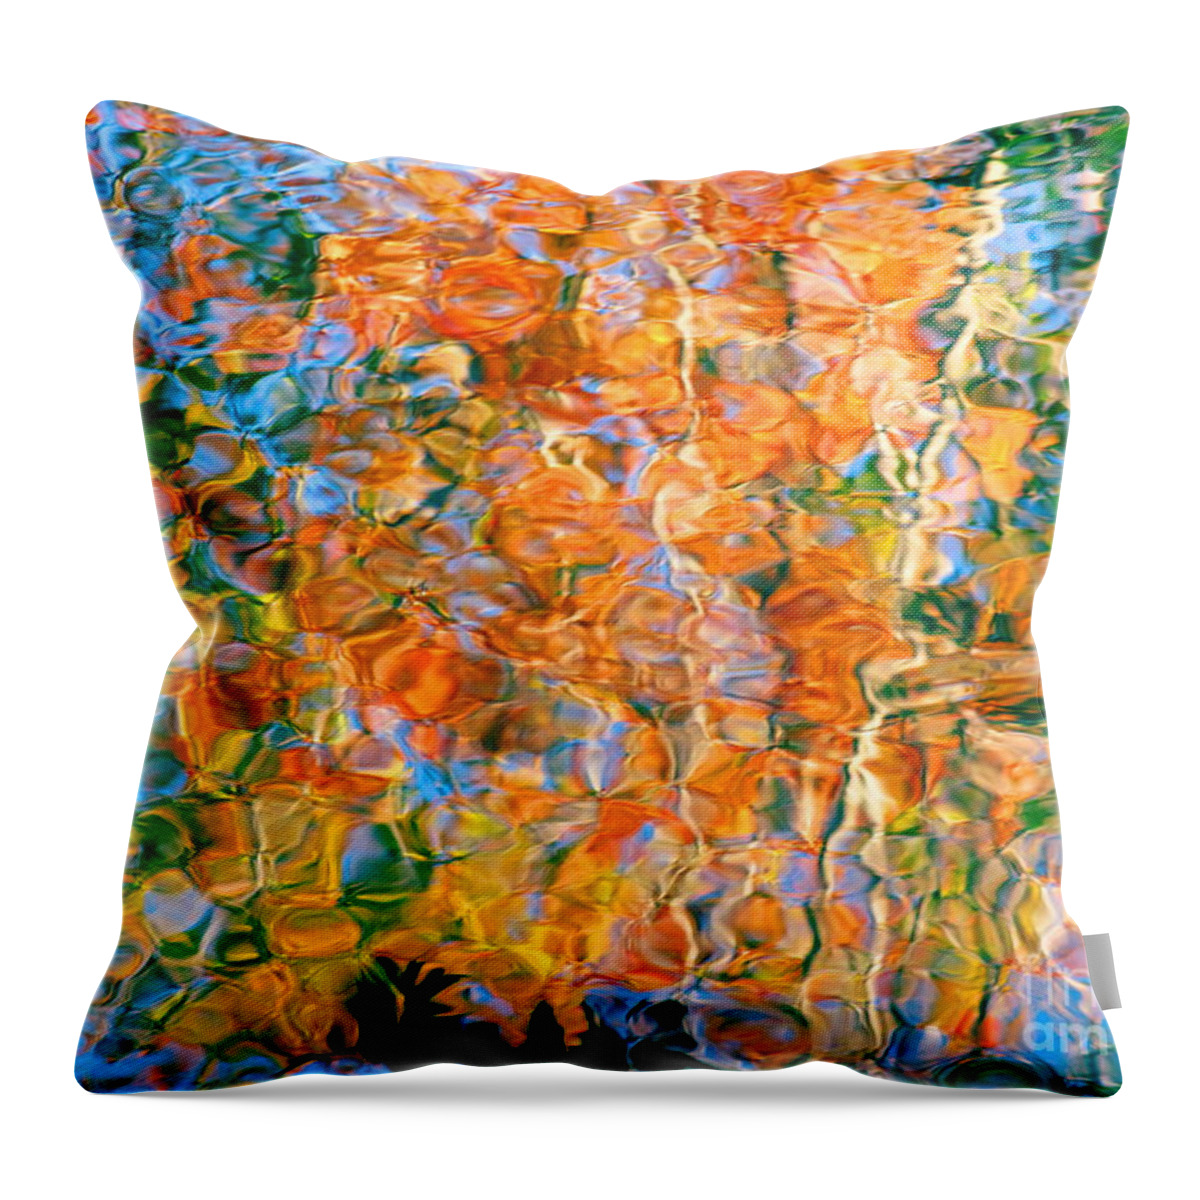  Colorful Liquid Throw Pillow featuring the photograph Grateful Heart by Sybil Staples